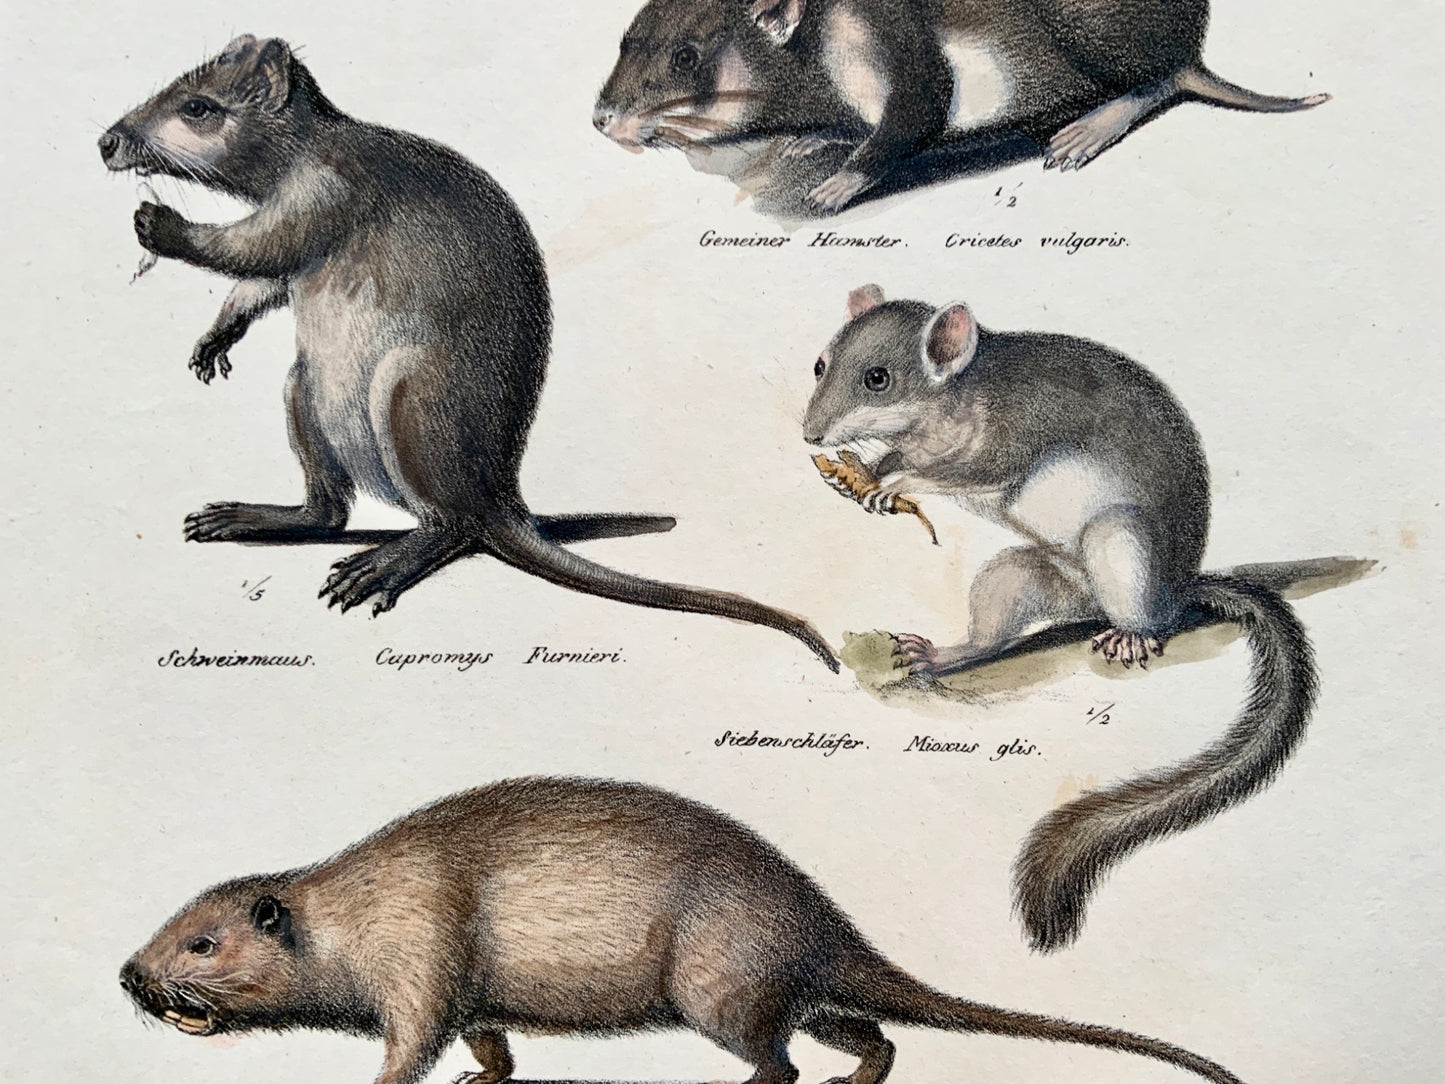 1824 Rodents: Hamster, Mice, Rats - K.J. Brodtmann hand colored FOLIO lithograph - Mammals